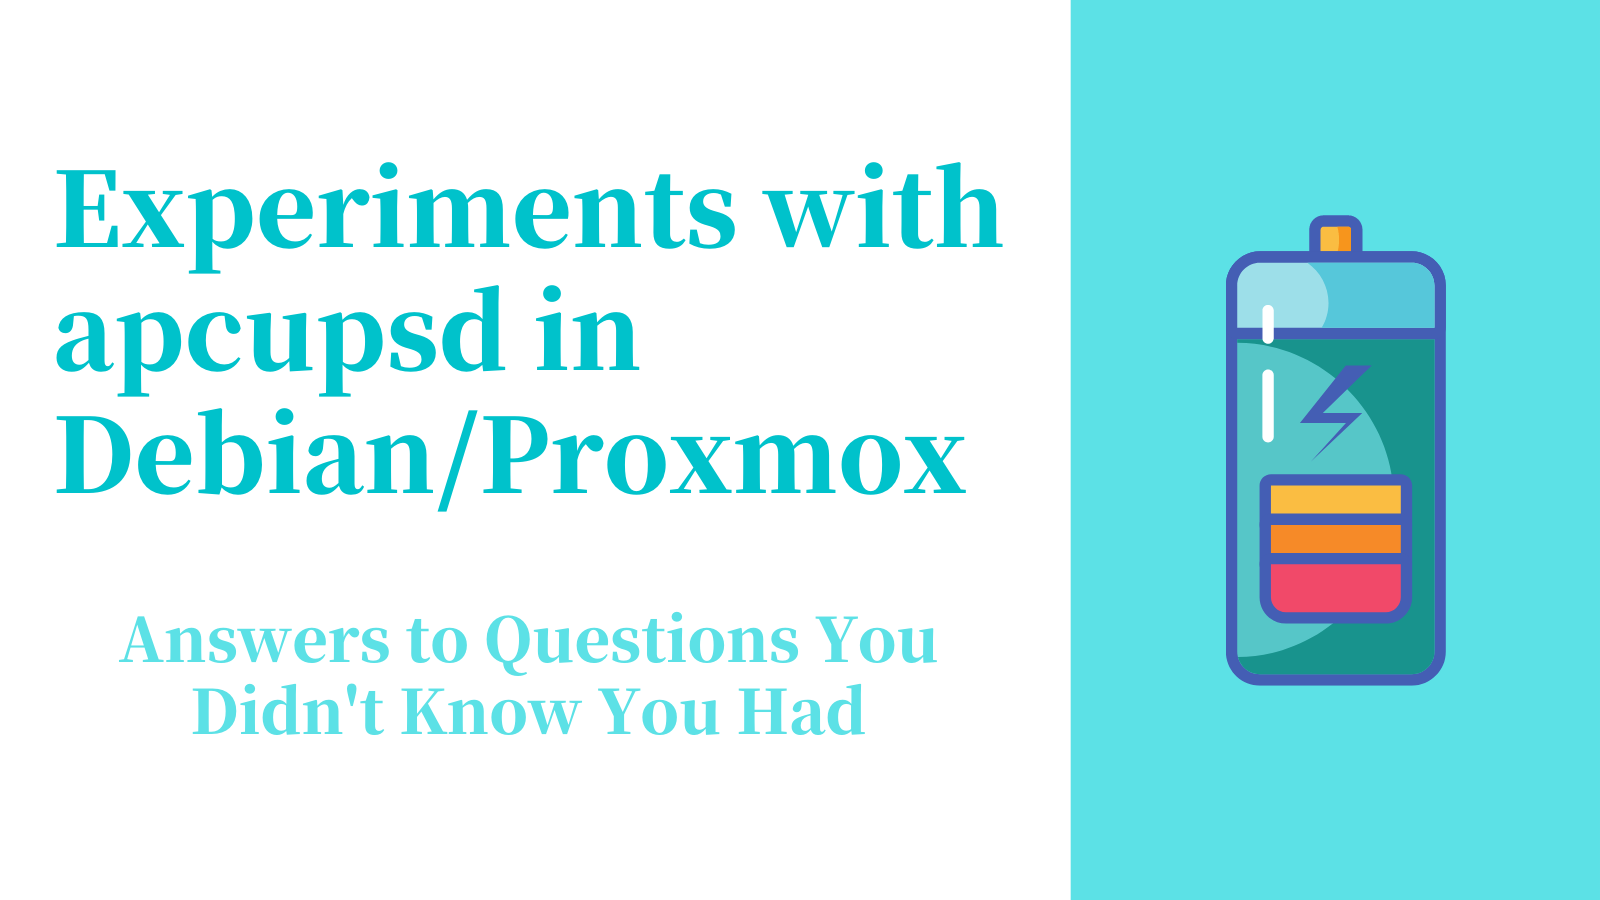 Experiments with apcupsd in Debian/Proxmox: Answers to Questions You Didn't Know You Had